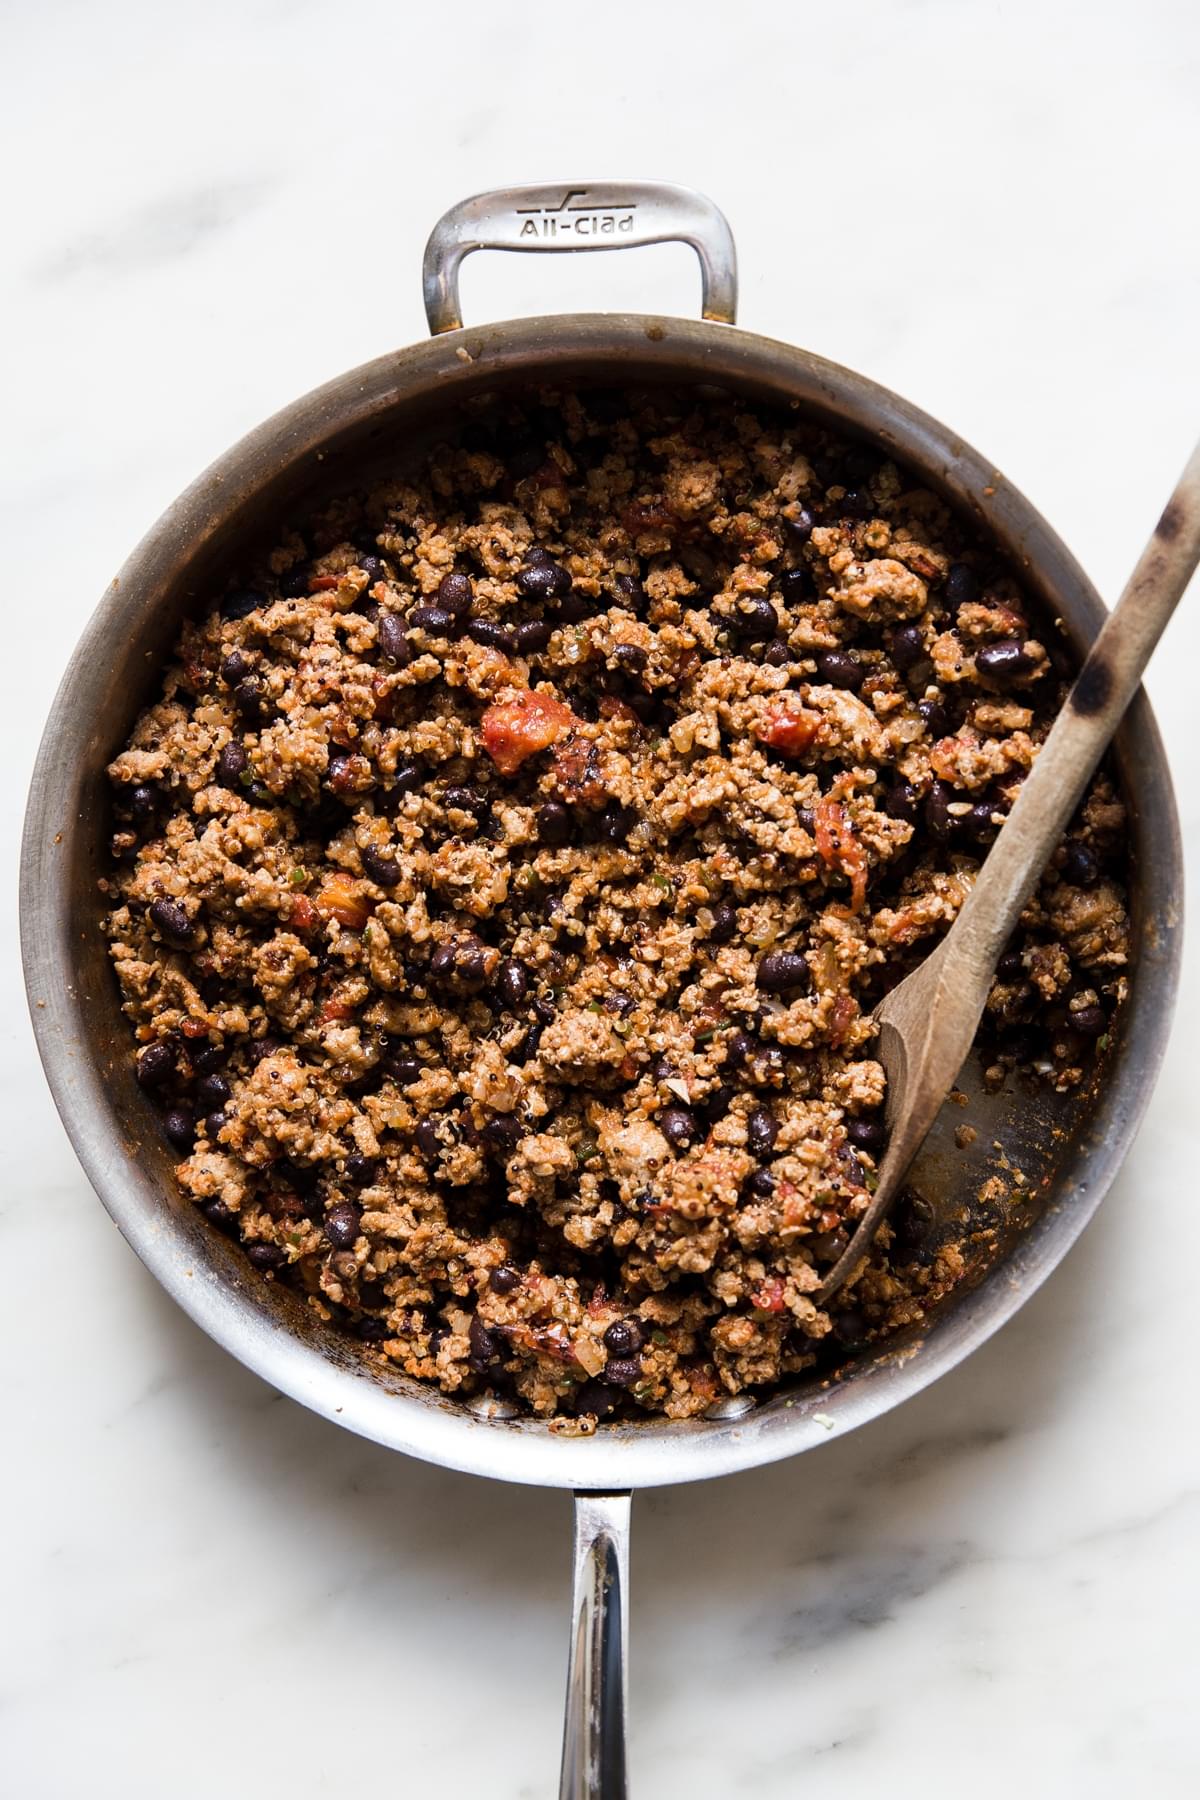 cooked ground turkey with black beans, tomatoes and spices for filling stuffed bell peppers